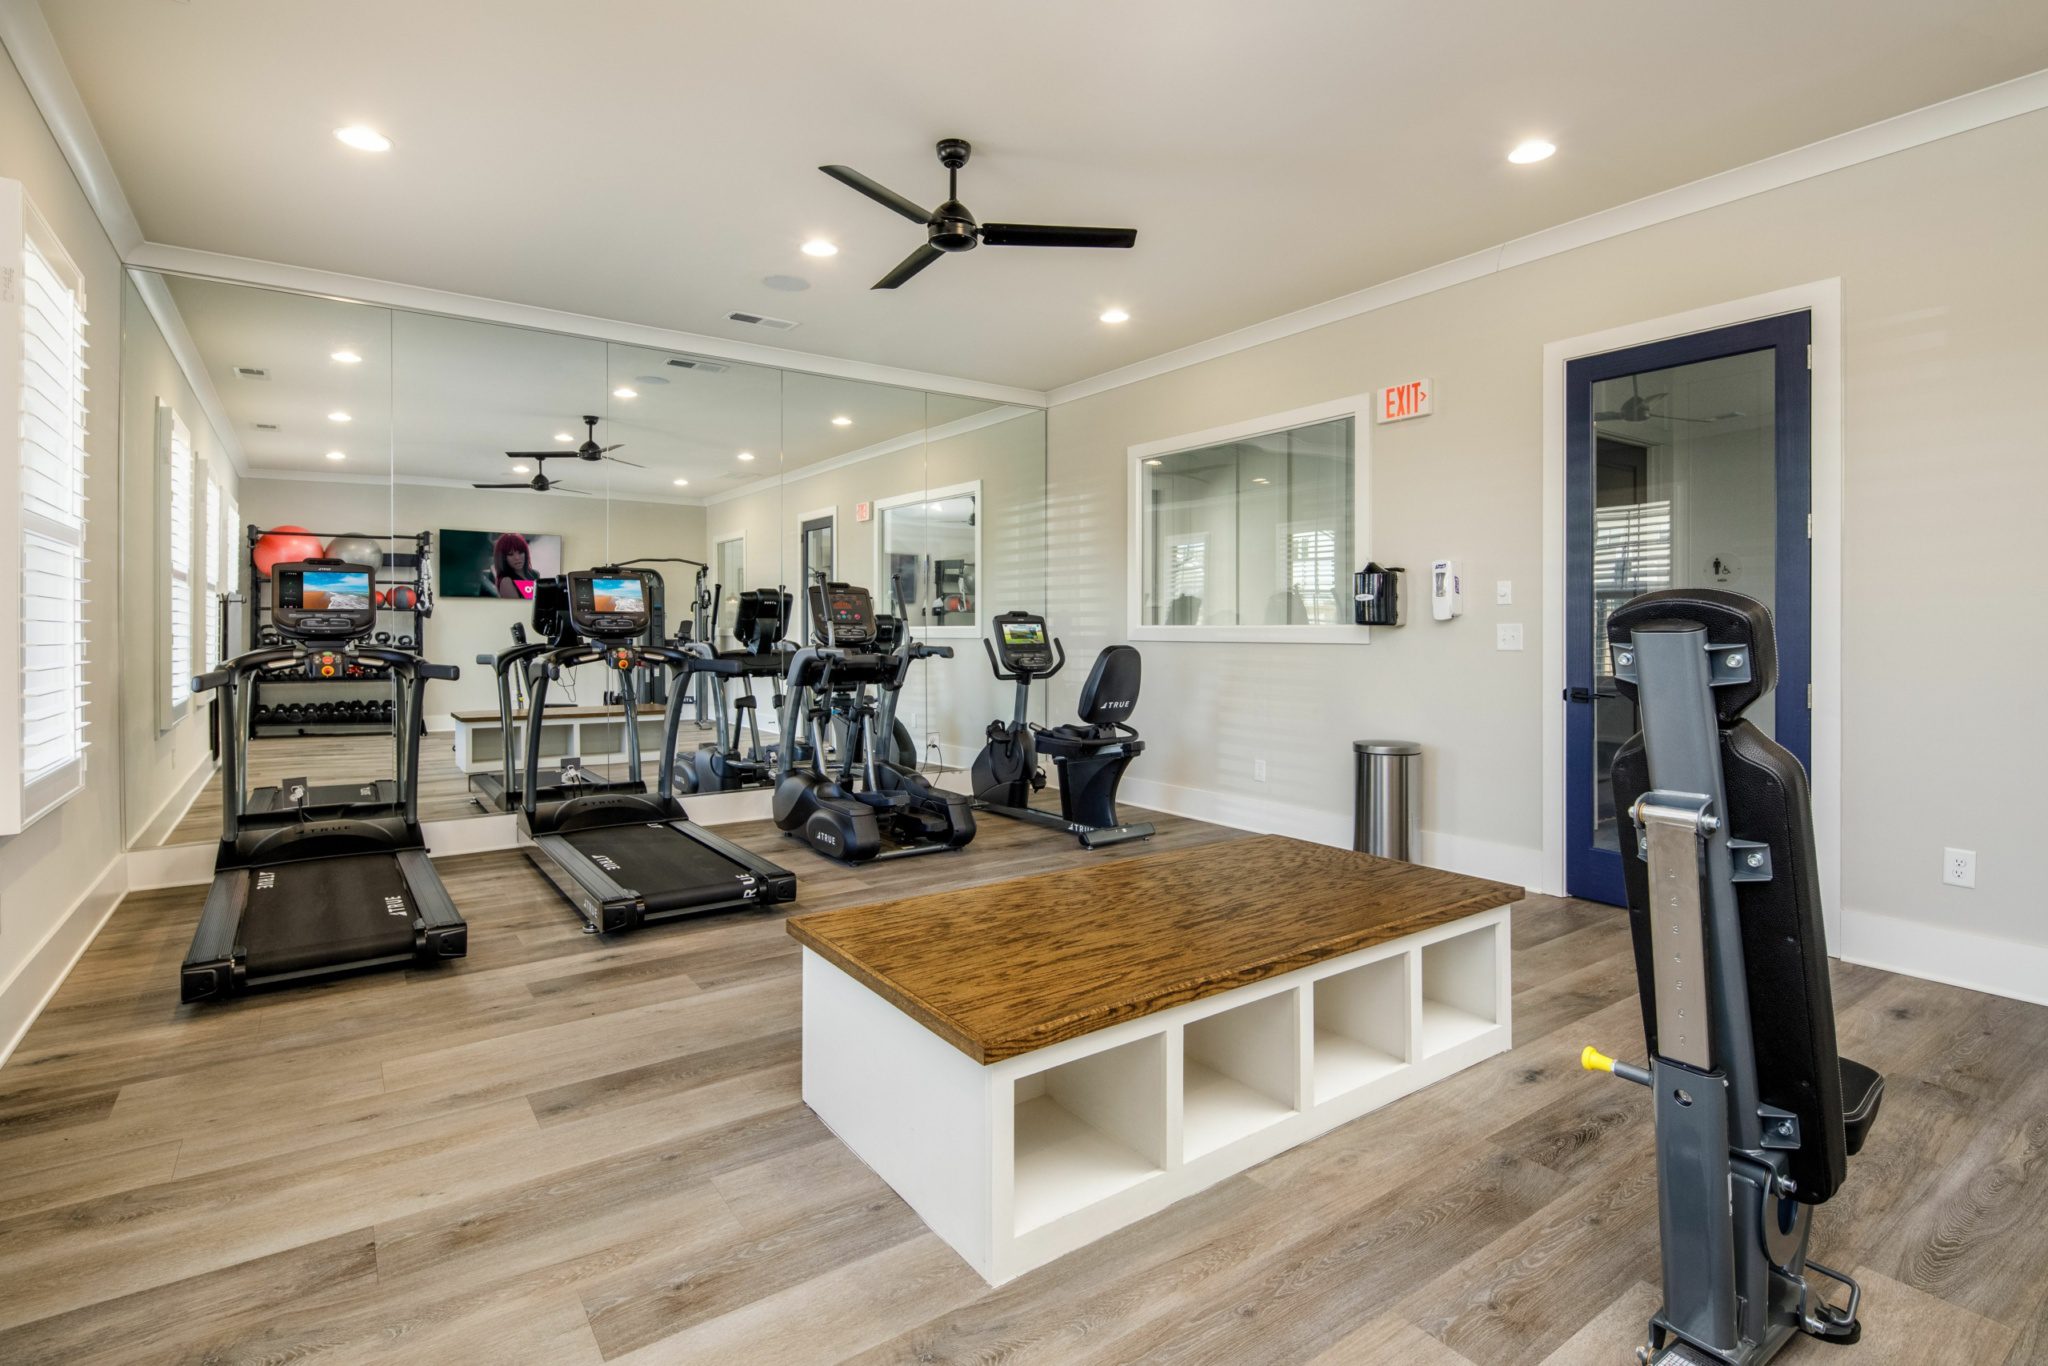 Gym room with treadmills, tvs, and other equipment